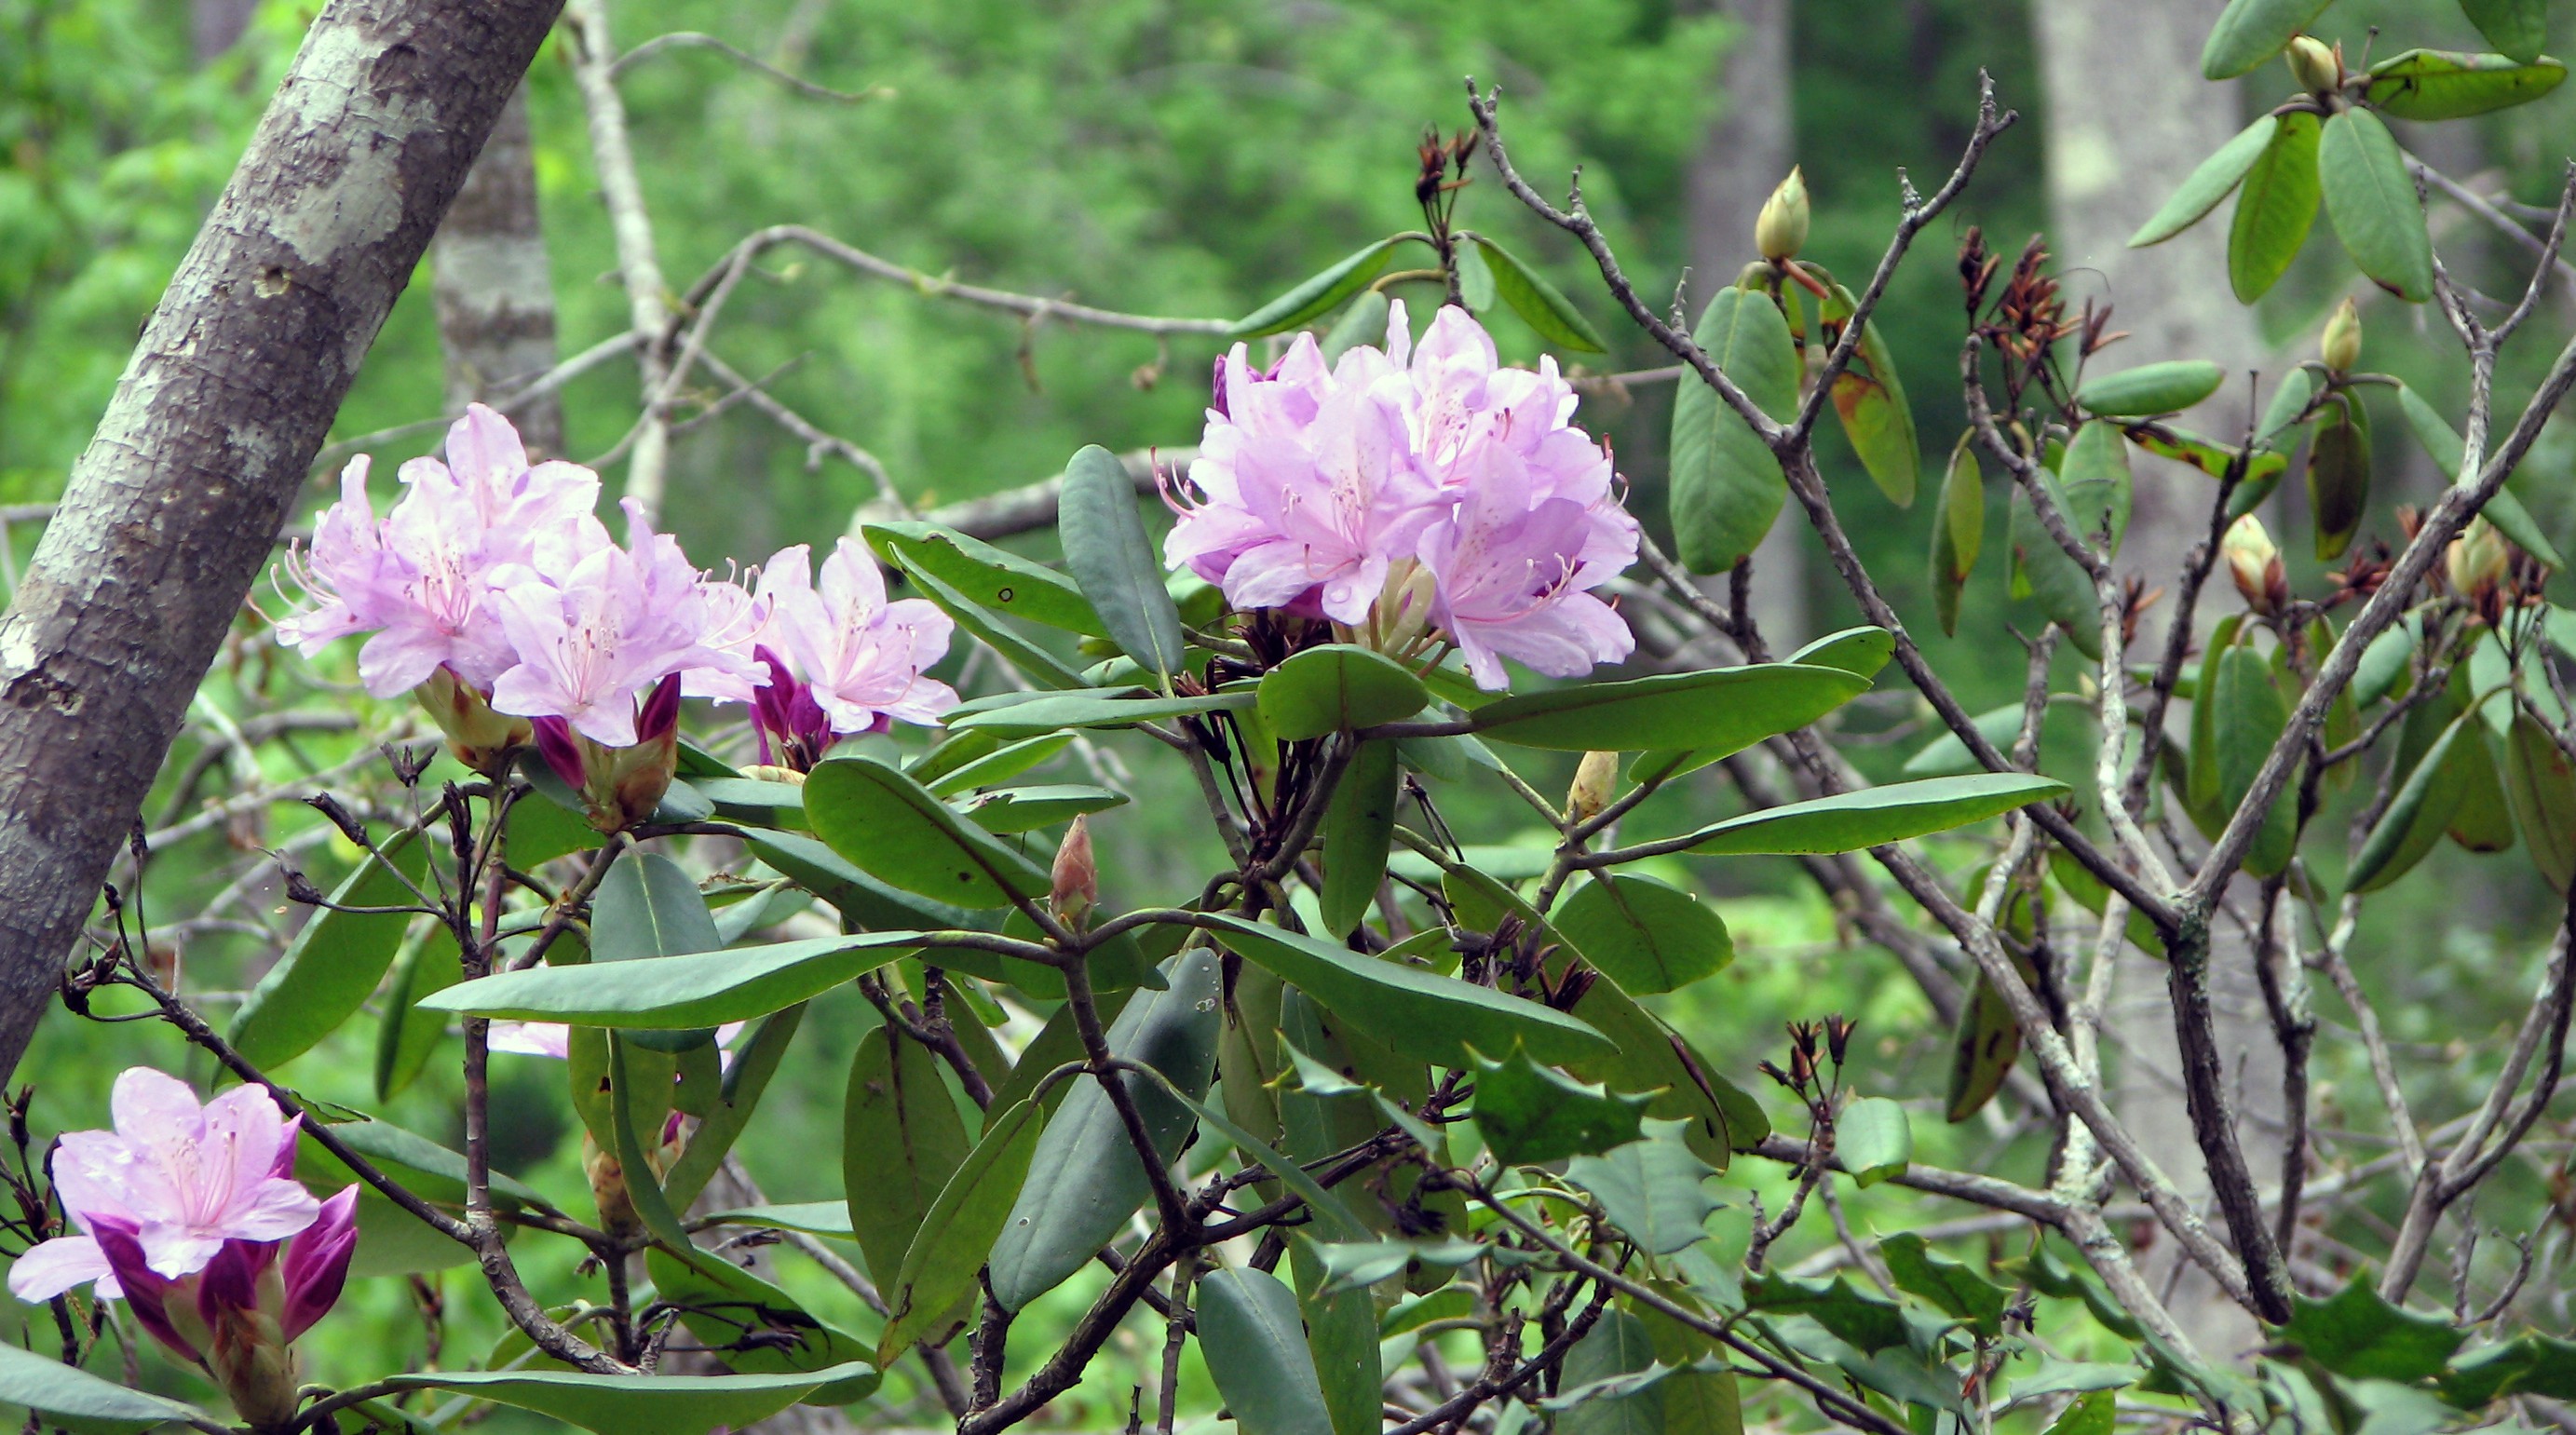 Easy Walk to Stunning Spring Flowers - Triangle Land Conservancy